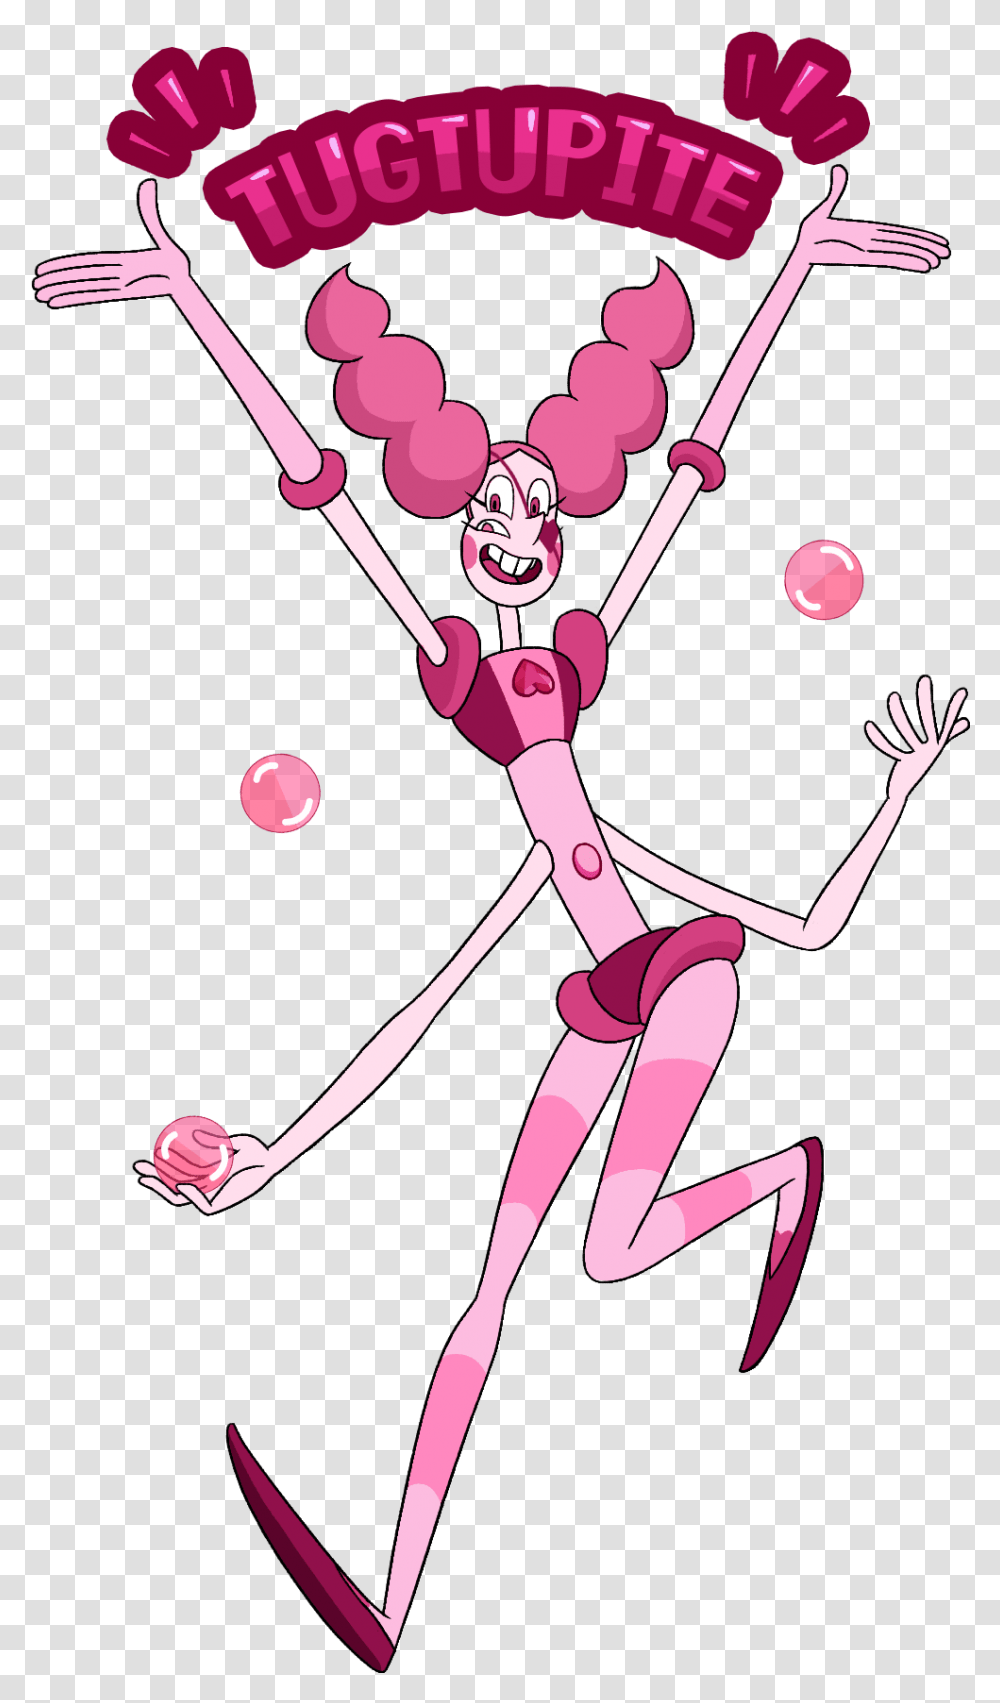 Steven Universe Pink Pearl And Spinel Fusion, Juggling, Scissors, Blade, Weapon Transparent Png